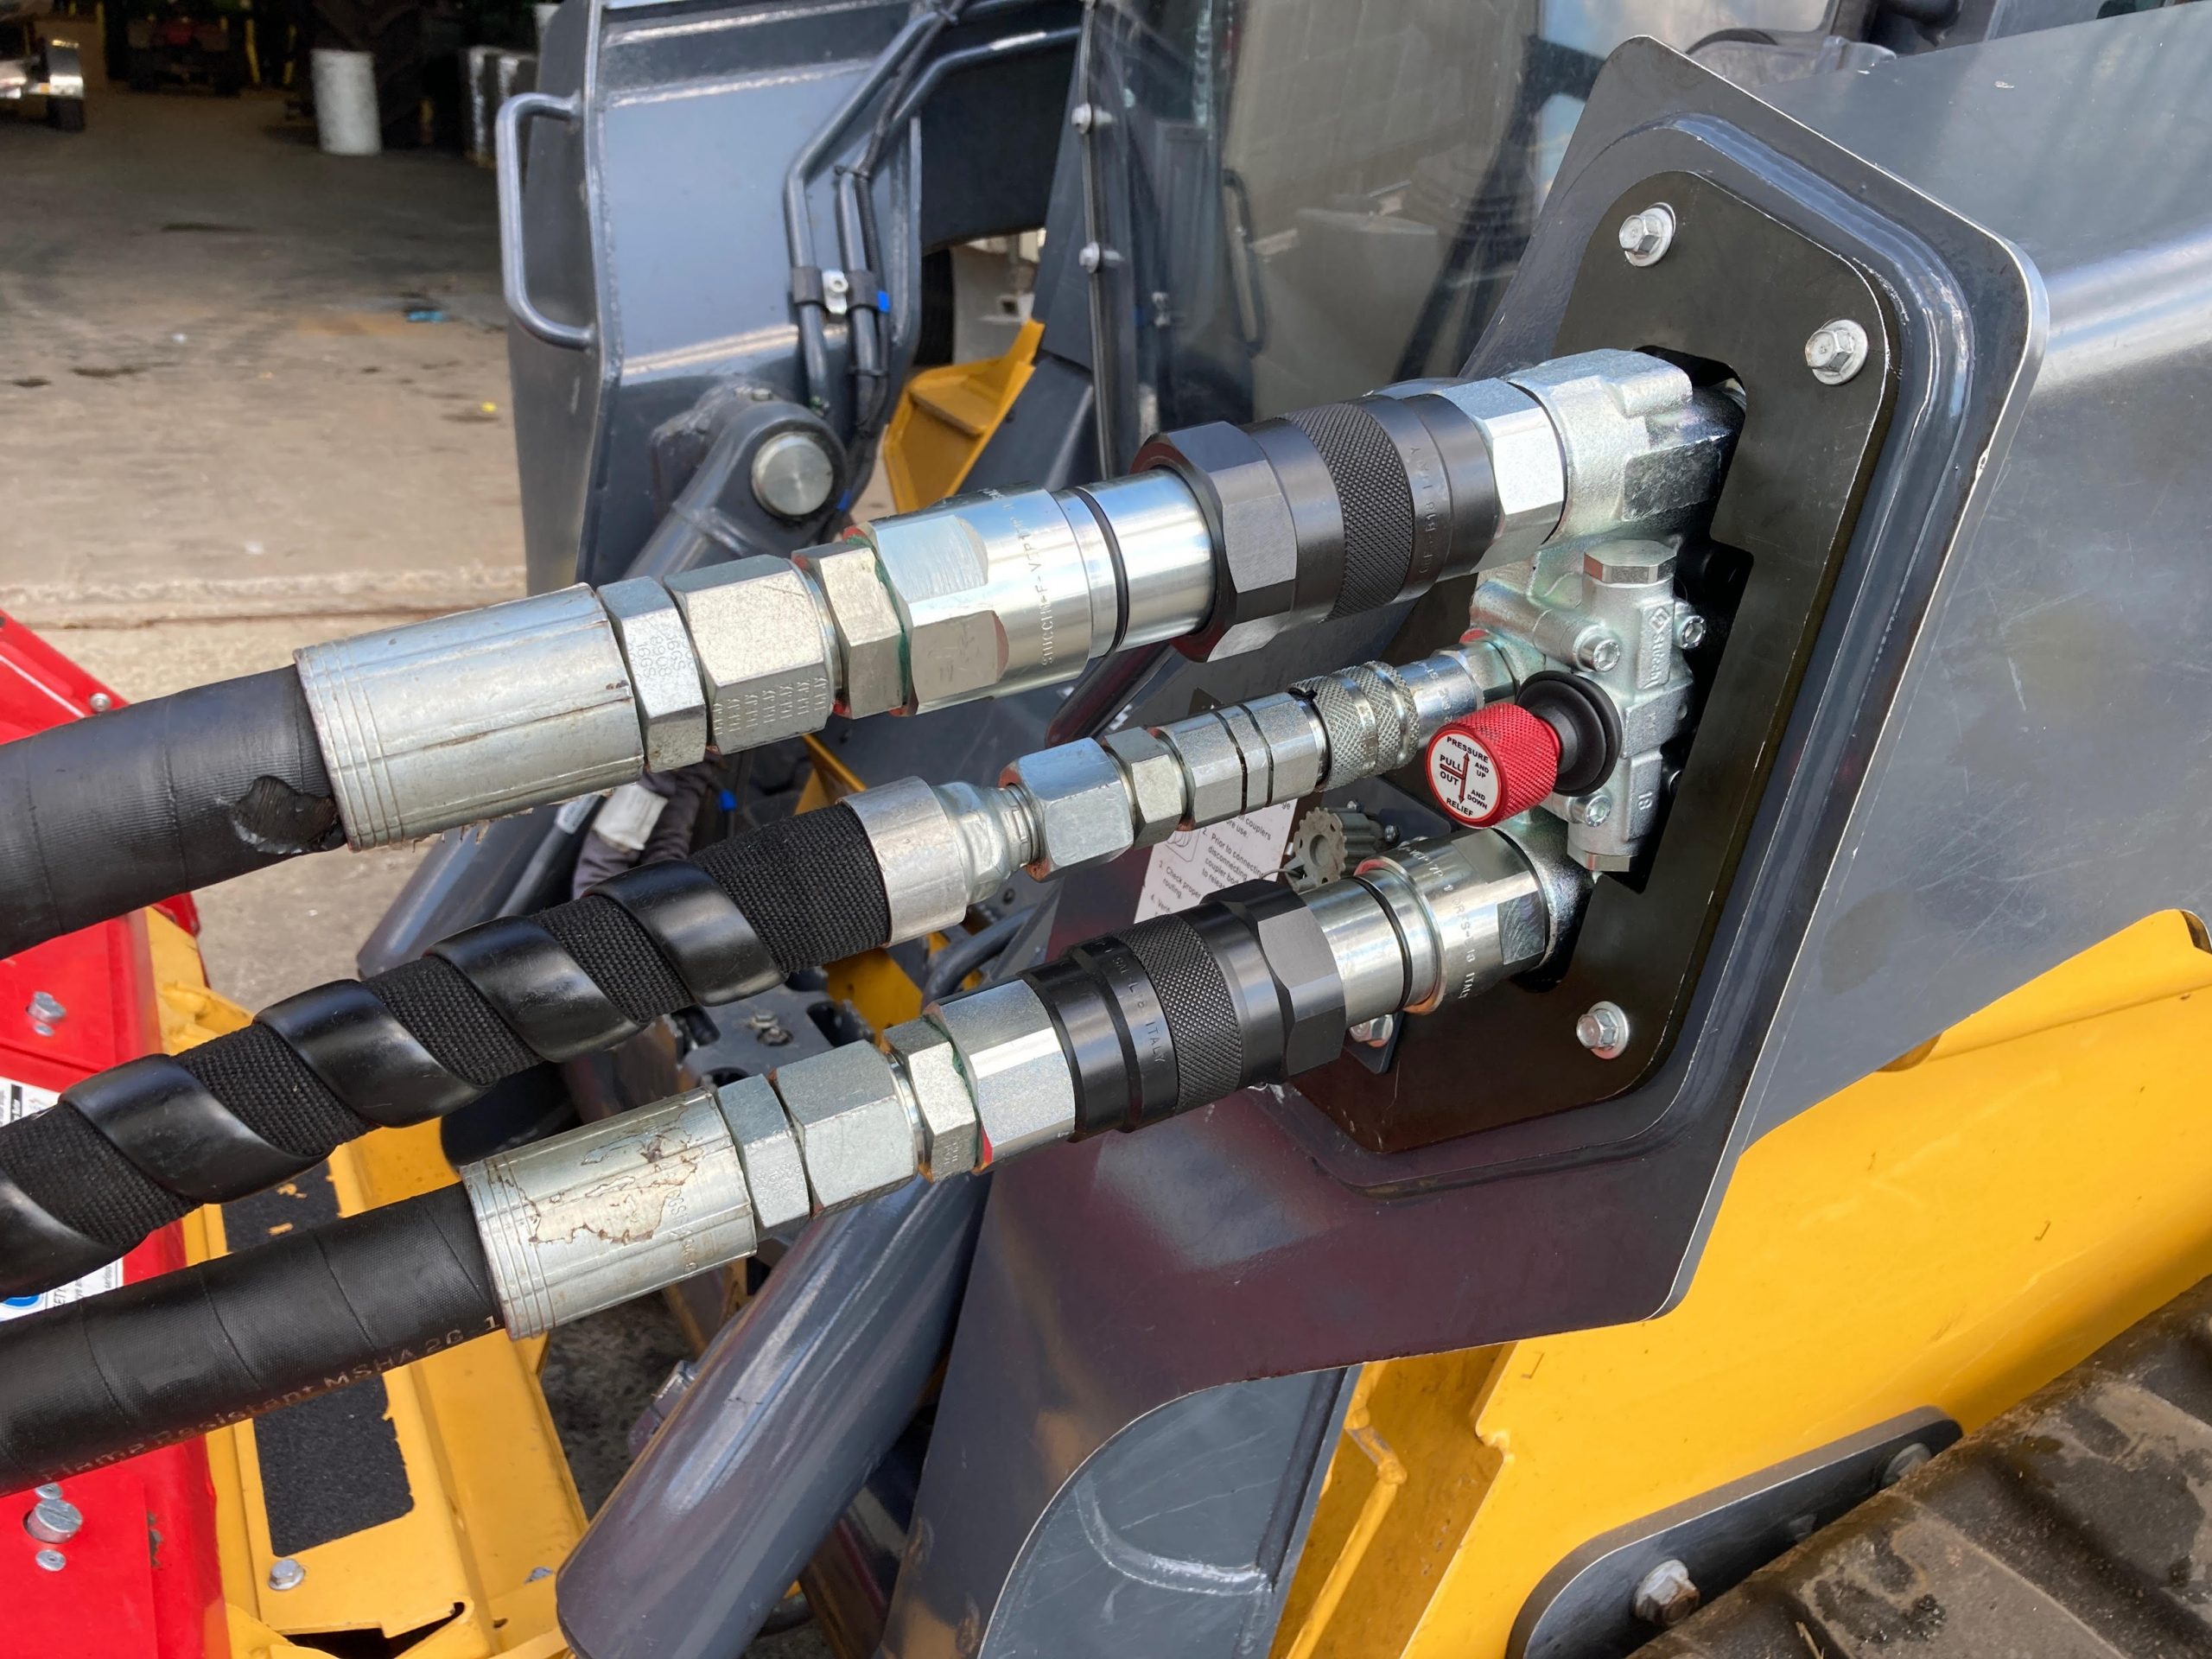 Do you support the oil and gas industry with custom hydraulic solutions?